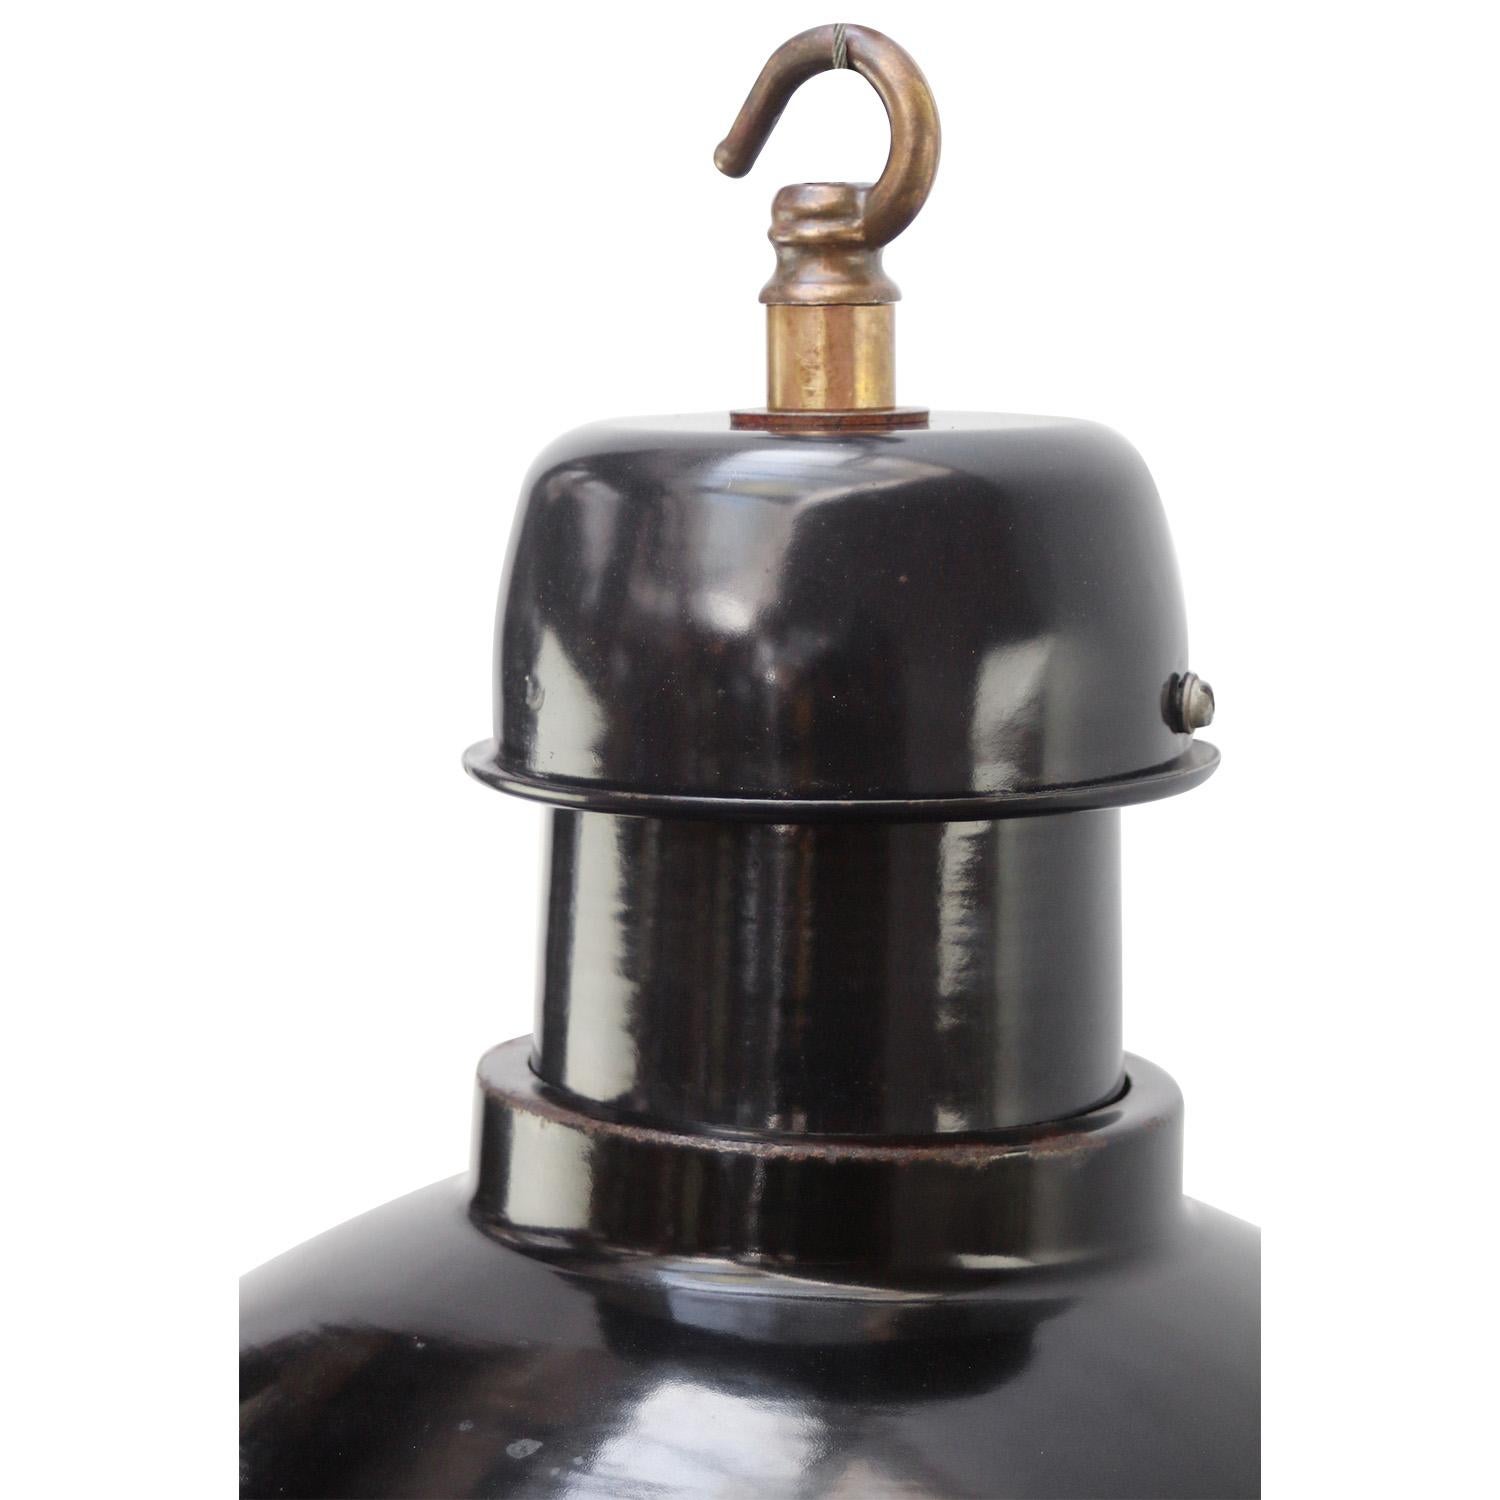 French black Industrial pendant lamp by GAL, France
Used in warehouses and factories in France and Belgium. 

Weight: 3.00 kg / 6.6 lb

Priced per individual item. All lamps have been made suitable by international standards for incandescent light